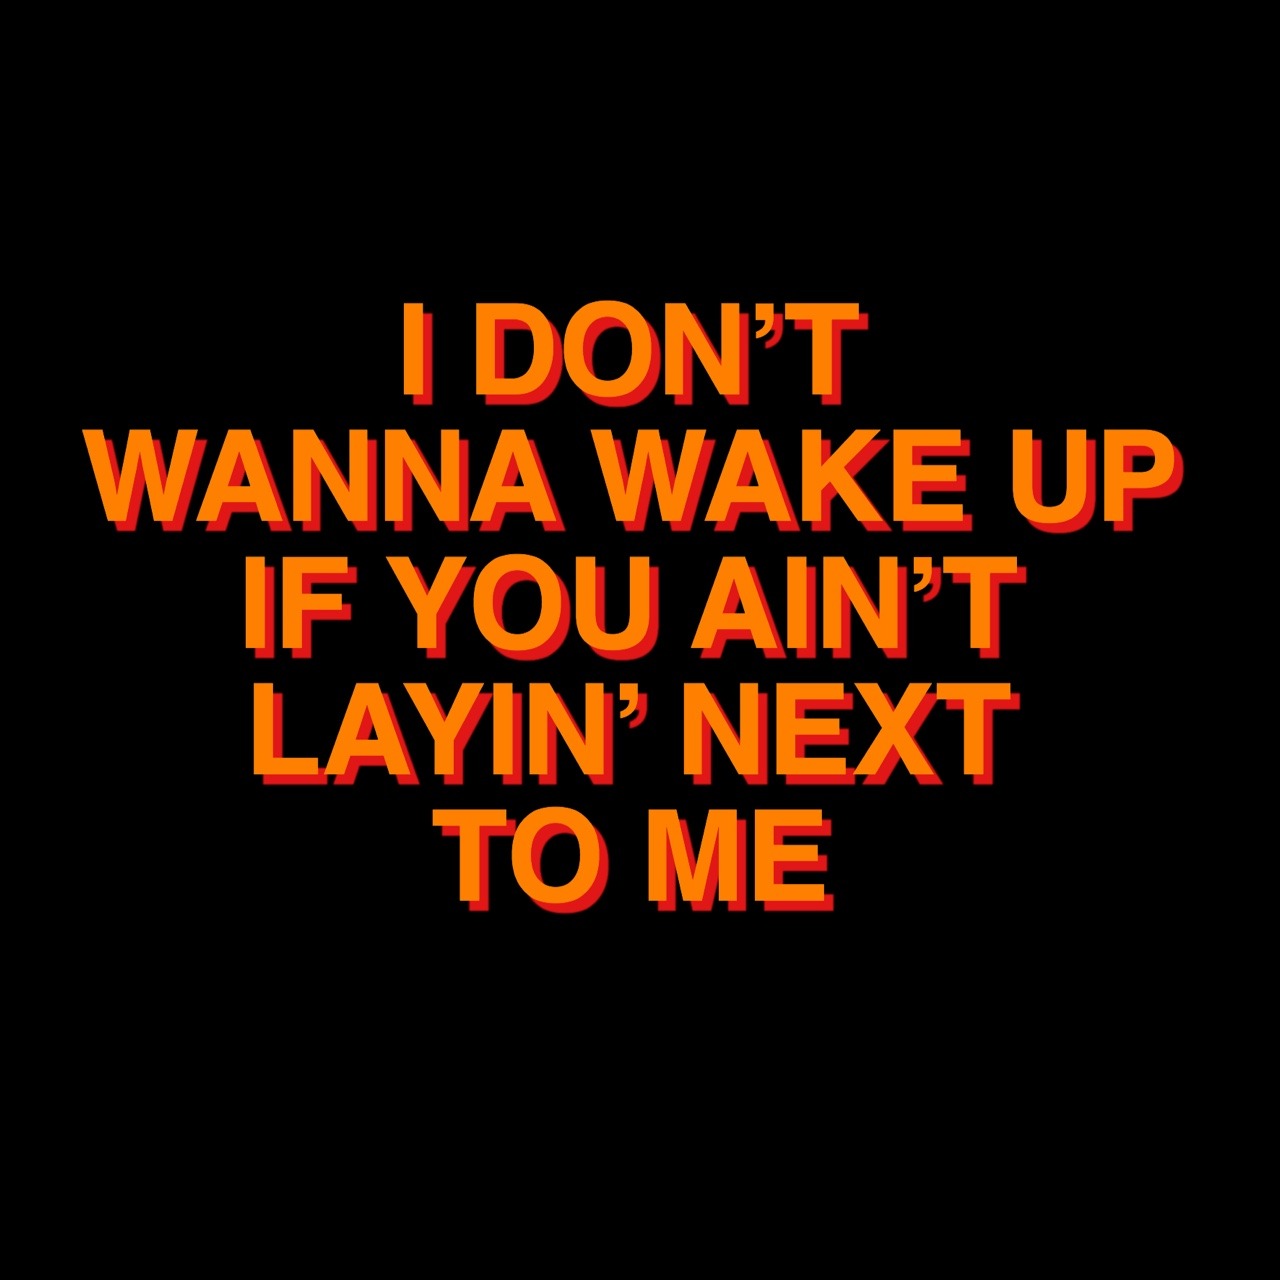 wasted times the weeknd lyrics